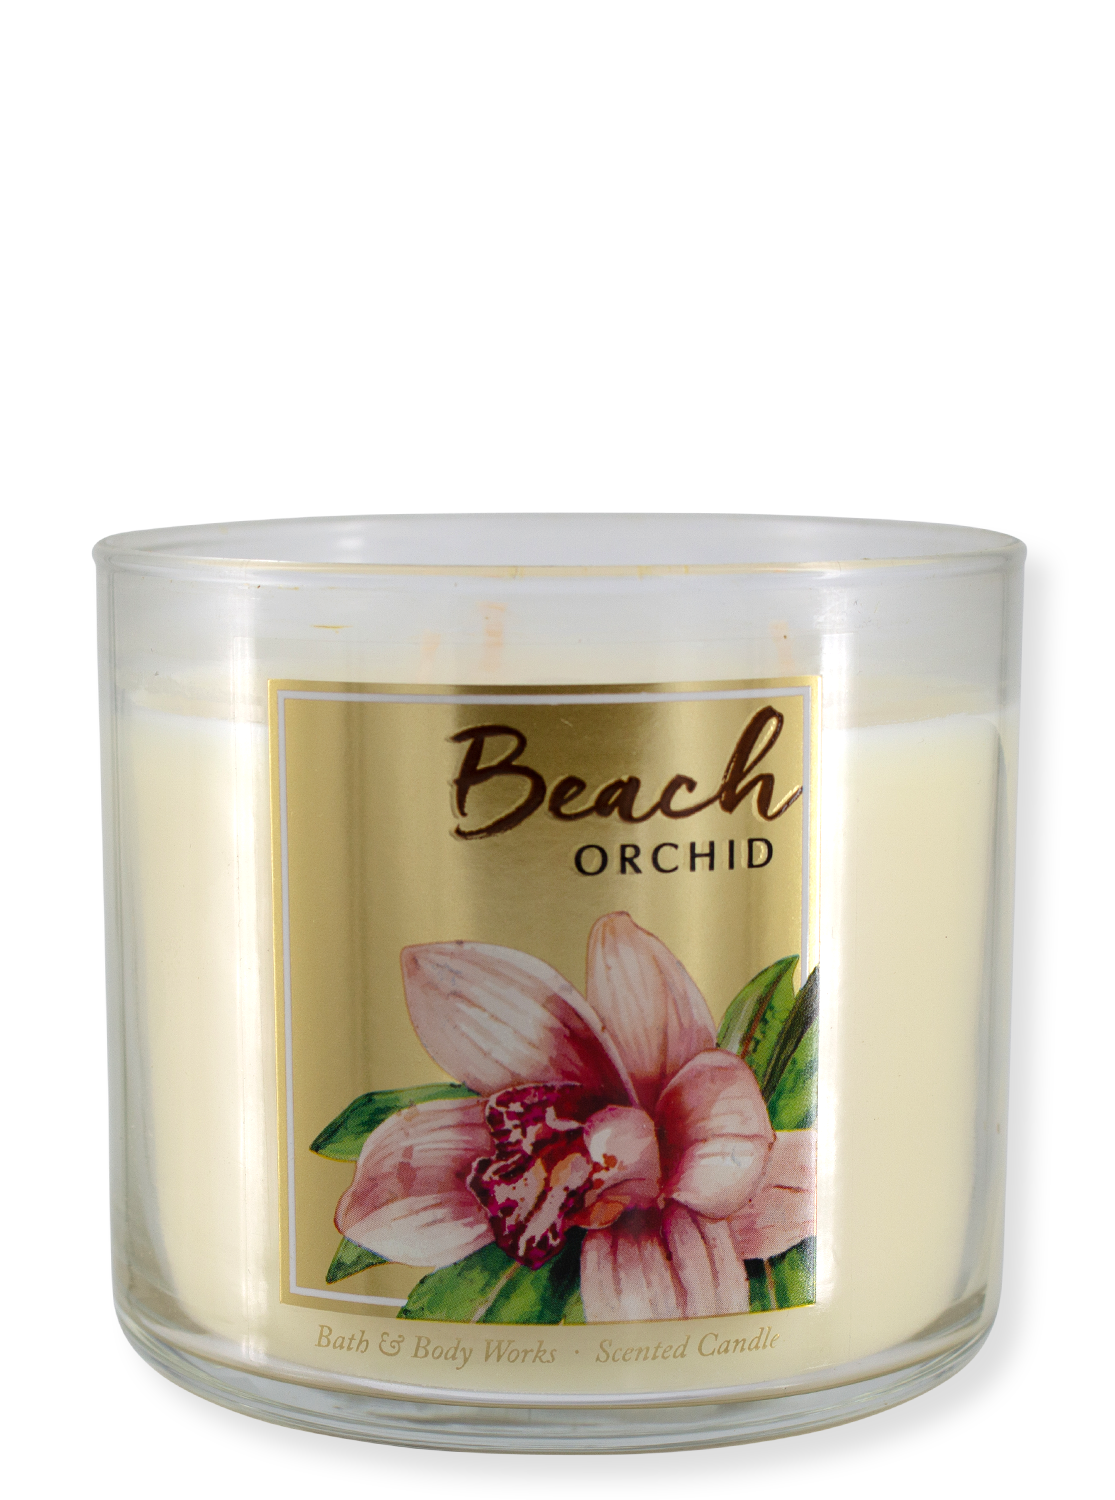 Rarity - 3 -poke candle - Beach Orchid - 411g